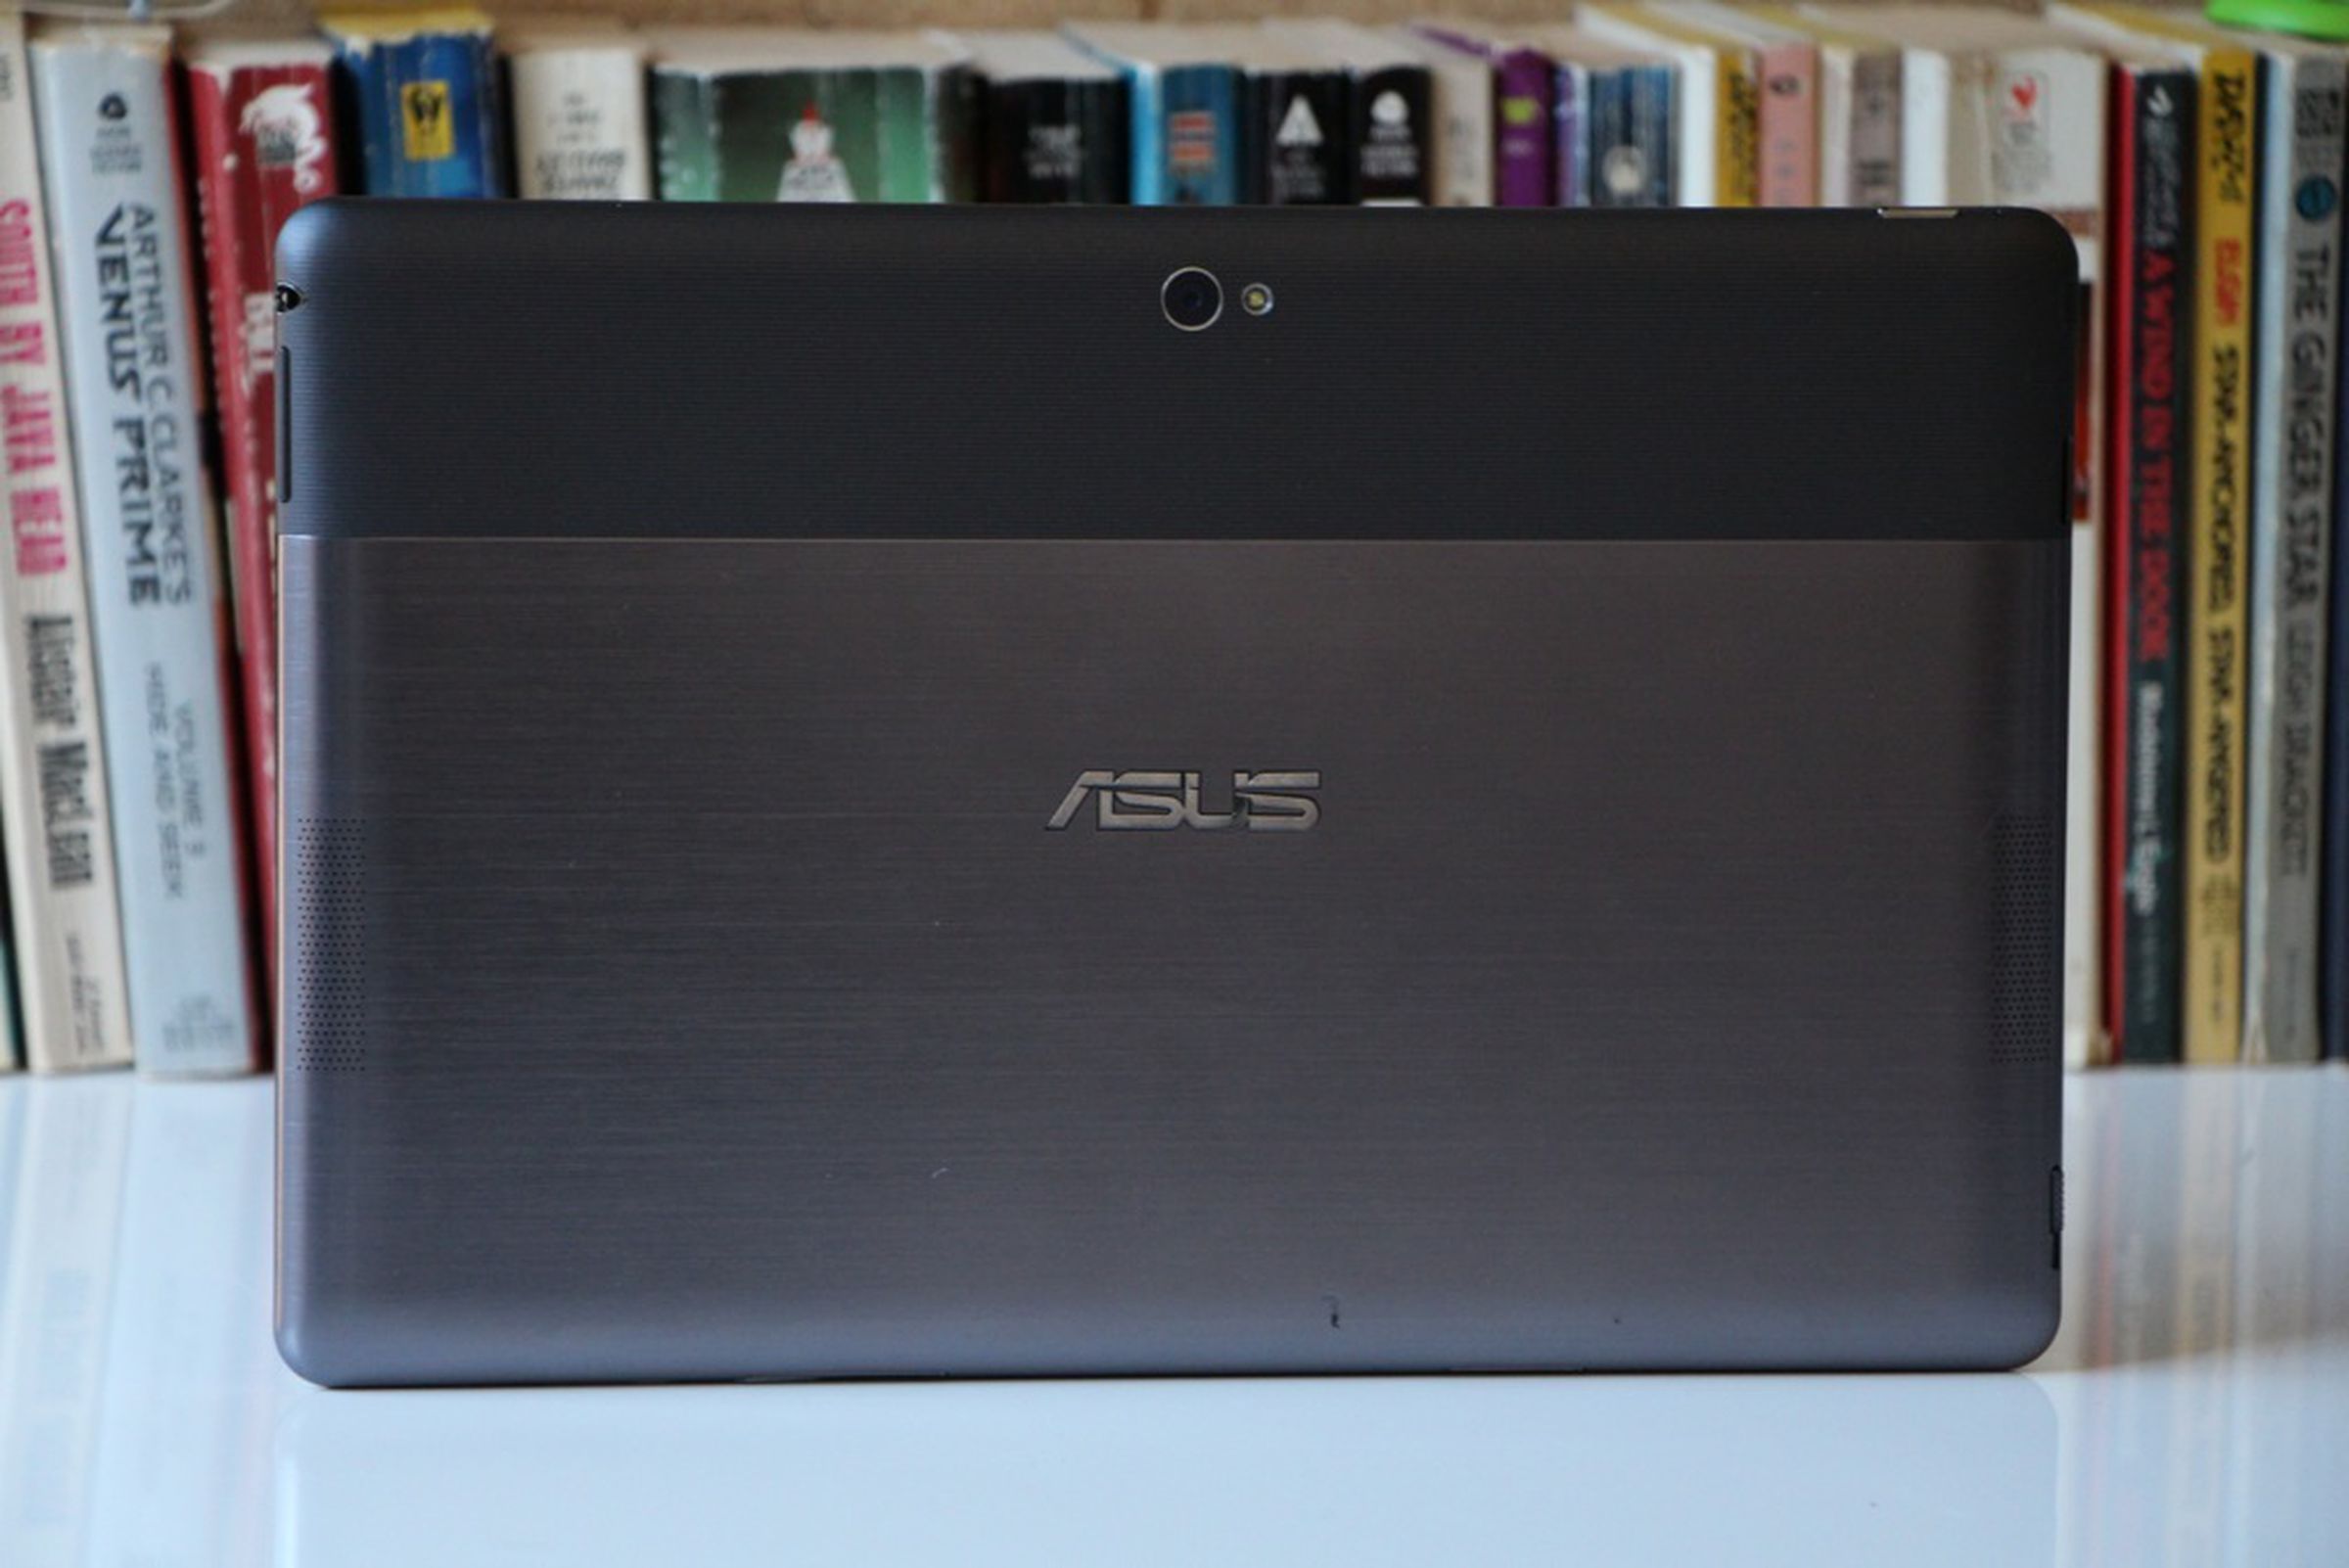 Asus Vivo Tab RT pictures